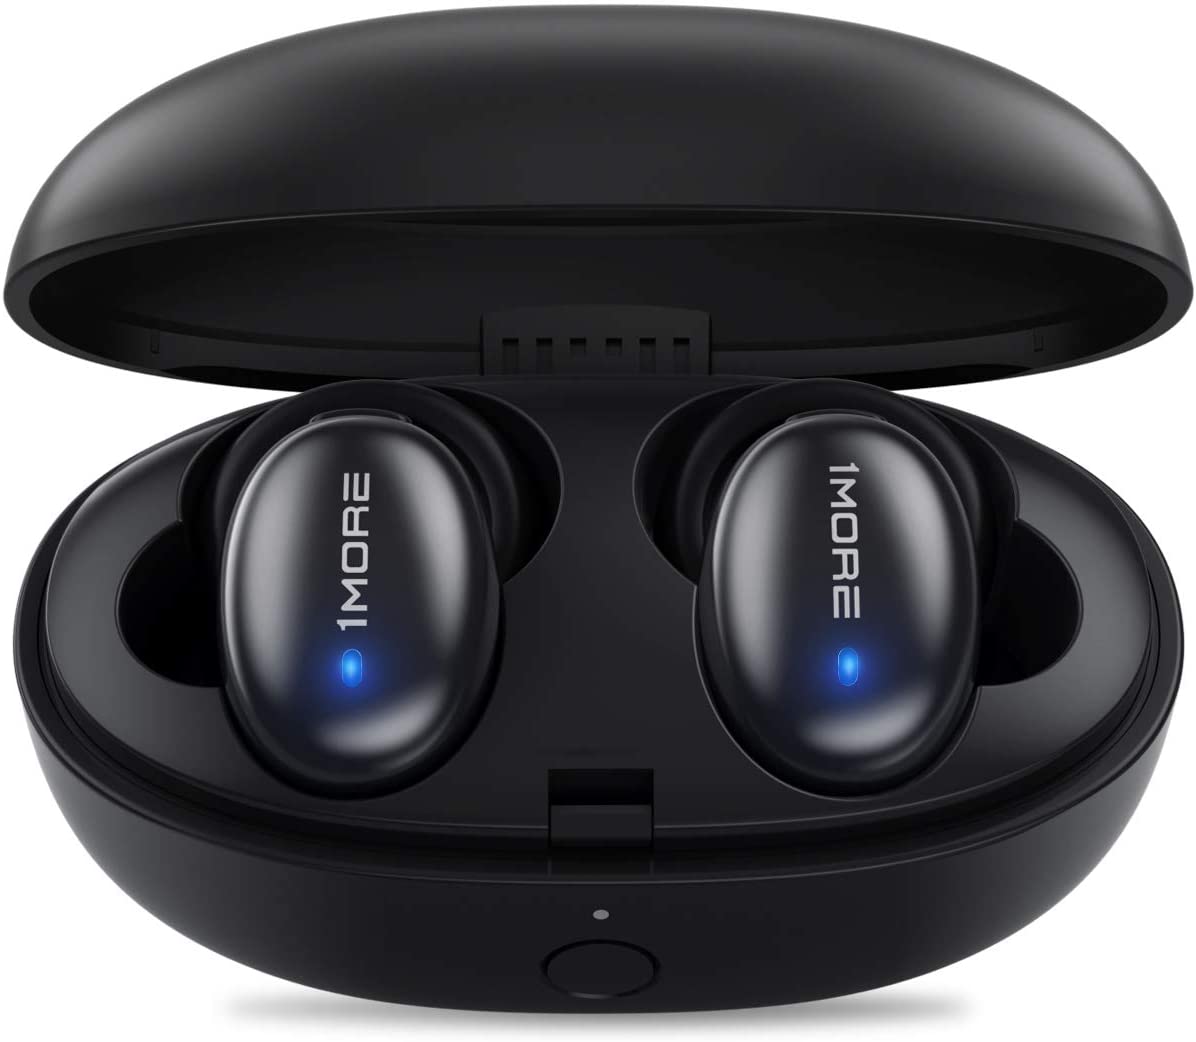 1MORE Stylish True Wireless Earbuds, Bluetooth 5.0, 24-Hour Playtime, Stereo In-Ear Headphones with Charging Case, Built-in Microphone, Alternate Pairing Mode, Premium Sound $11.01